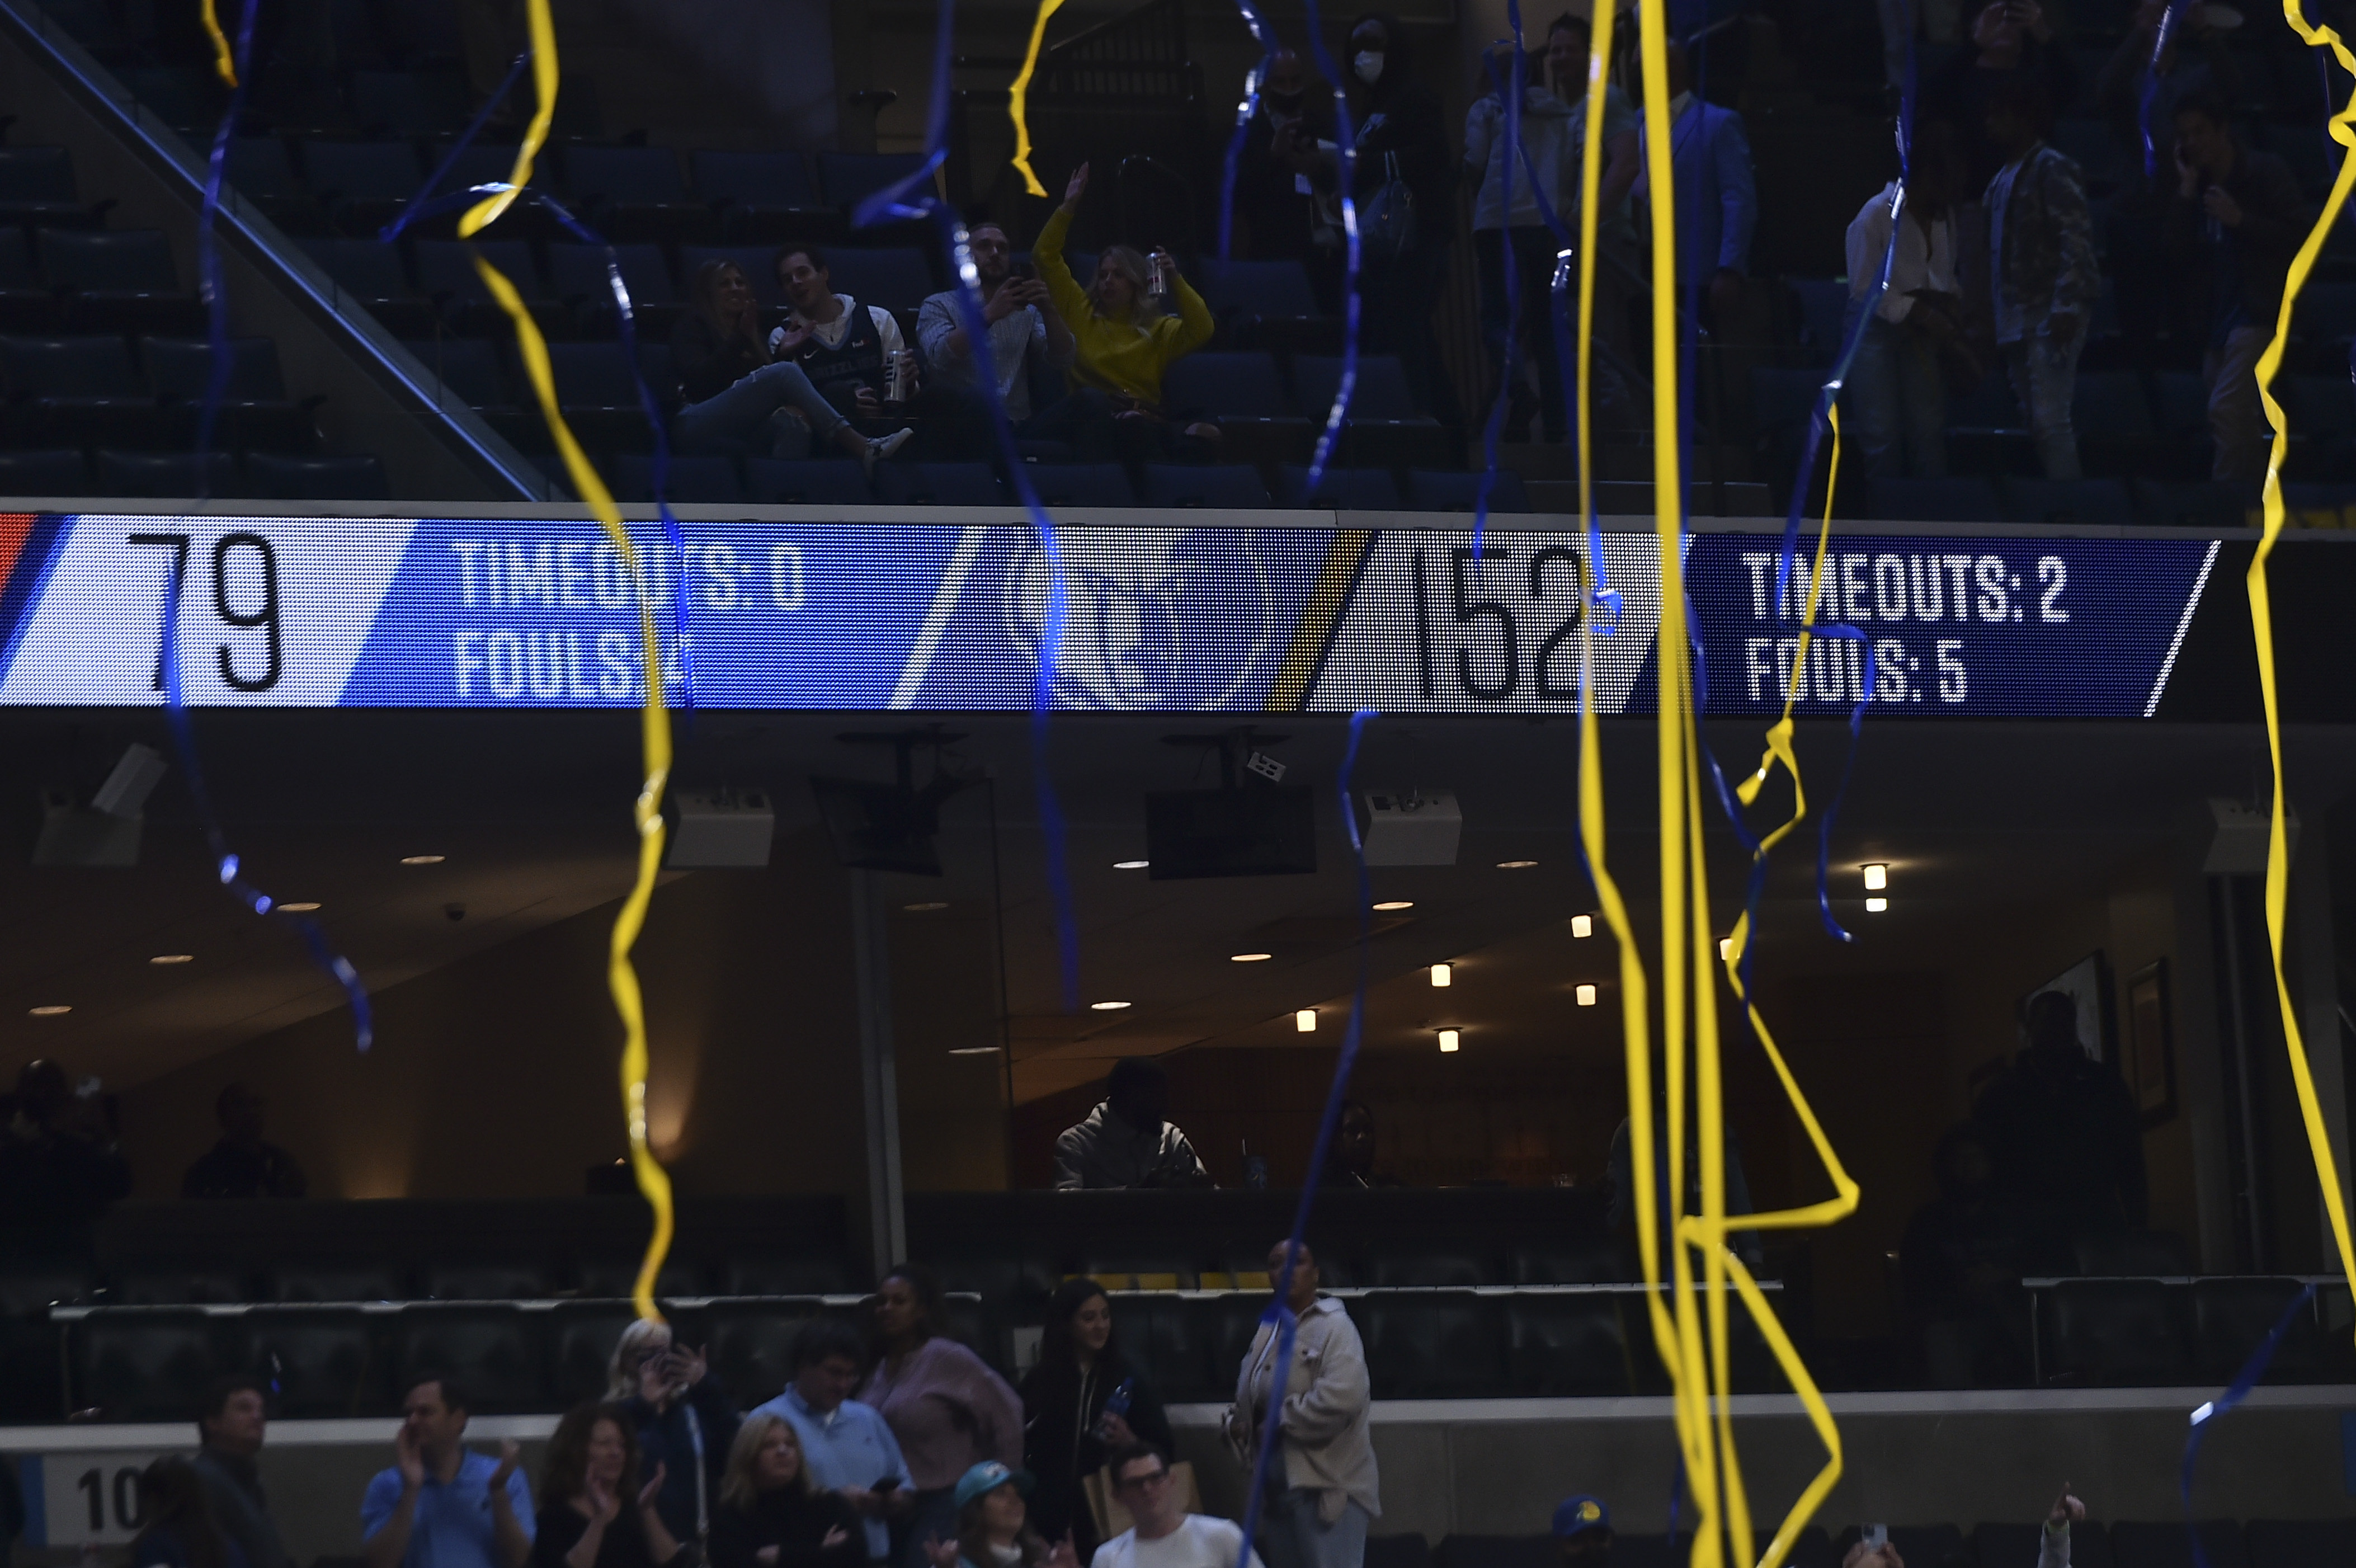 Dec 2, 2021; Memphis, Tennessee, USA; A view of the scoreboard after the Memphis Grizzlies defeated the Oklahoma City Thunder  at FedExForum. Mandatory Credit: Justin Ford-USA TODAY Sports